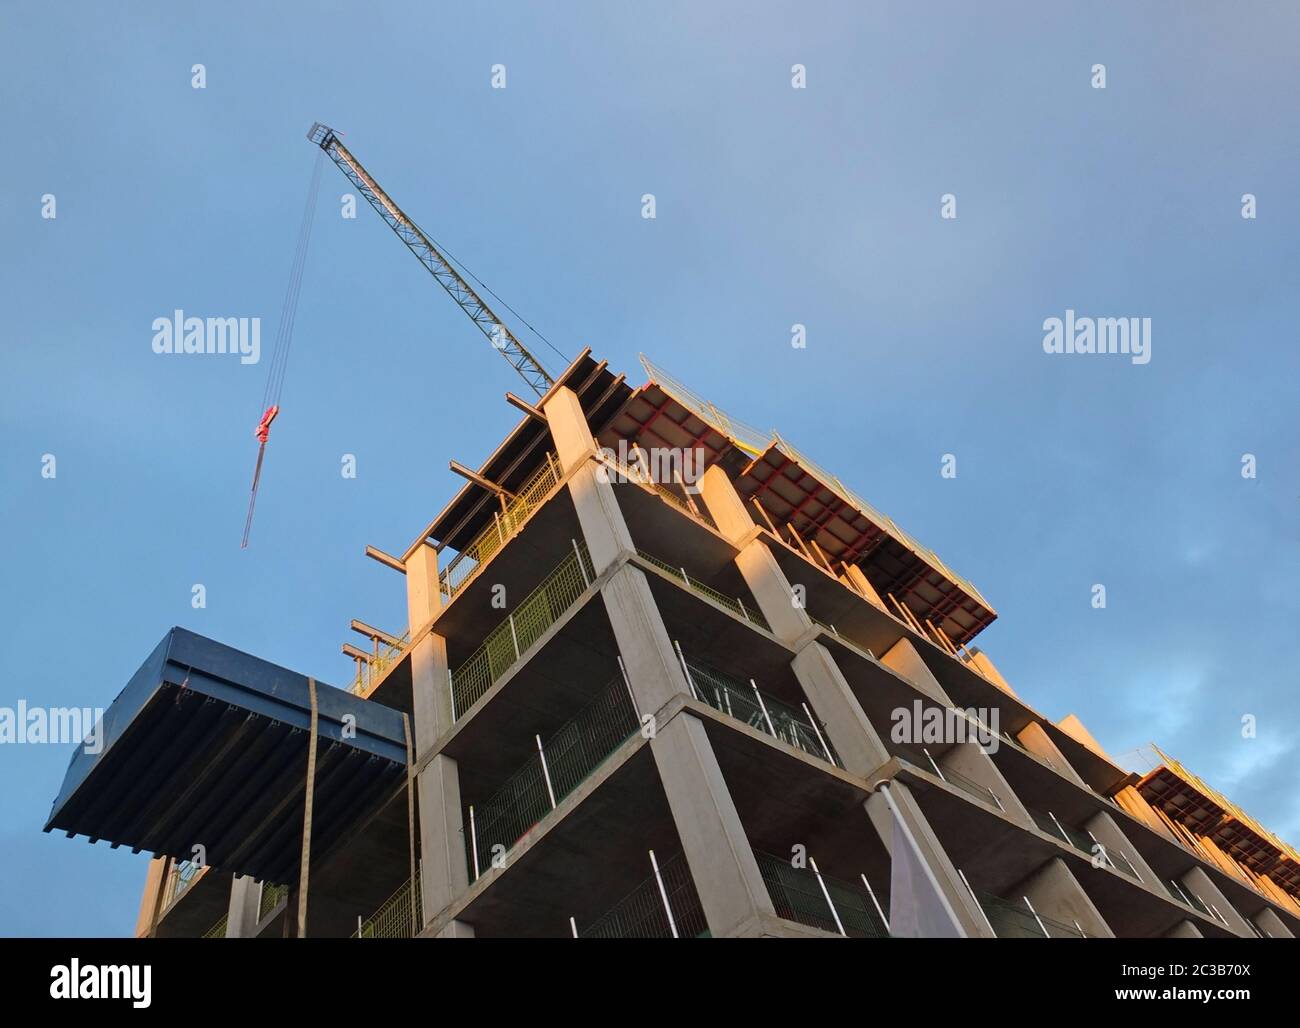 a vertical corner view of a crane on a construction site with a concrete framework against a blue sunlit sky Stock Photo